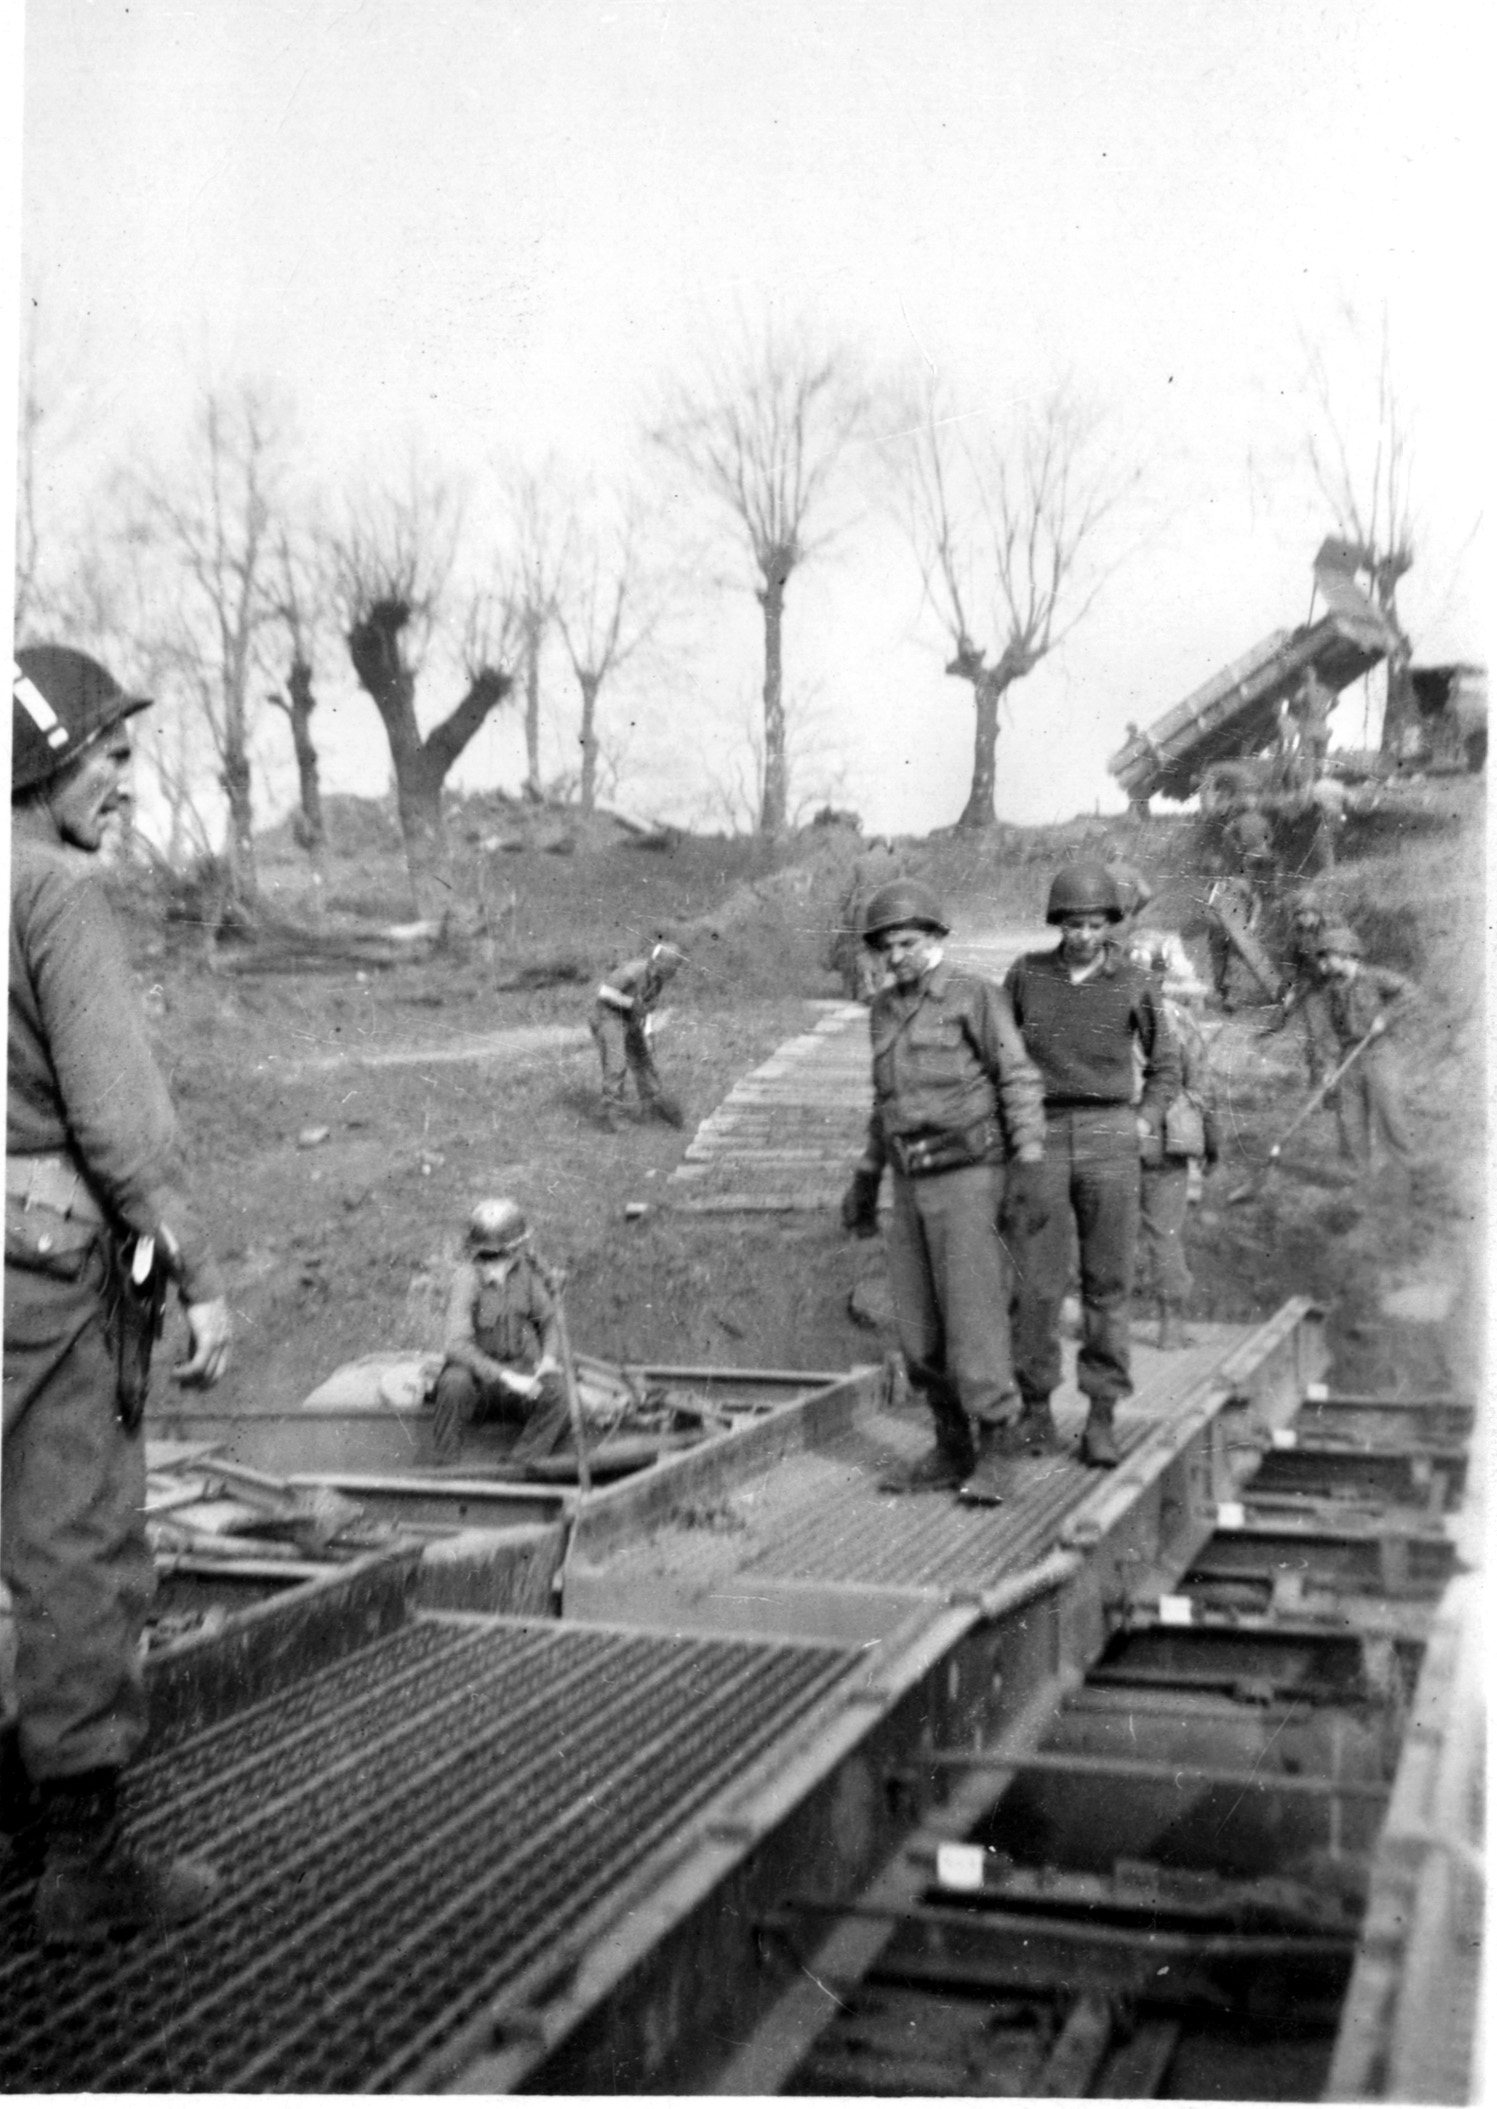 American combat engineers erect a bridge across a river in France during the Allied drive into Germany in the last year of World War II. Baker was assigned to command of Company B, 290th Combat Engineers, but he and his unit served as riflemen for several frigid weeks during fighting in the Vosges Mountains. 